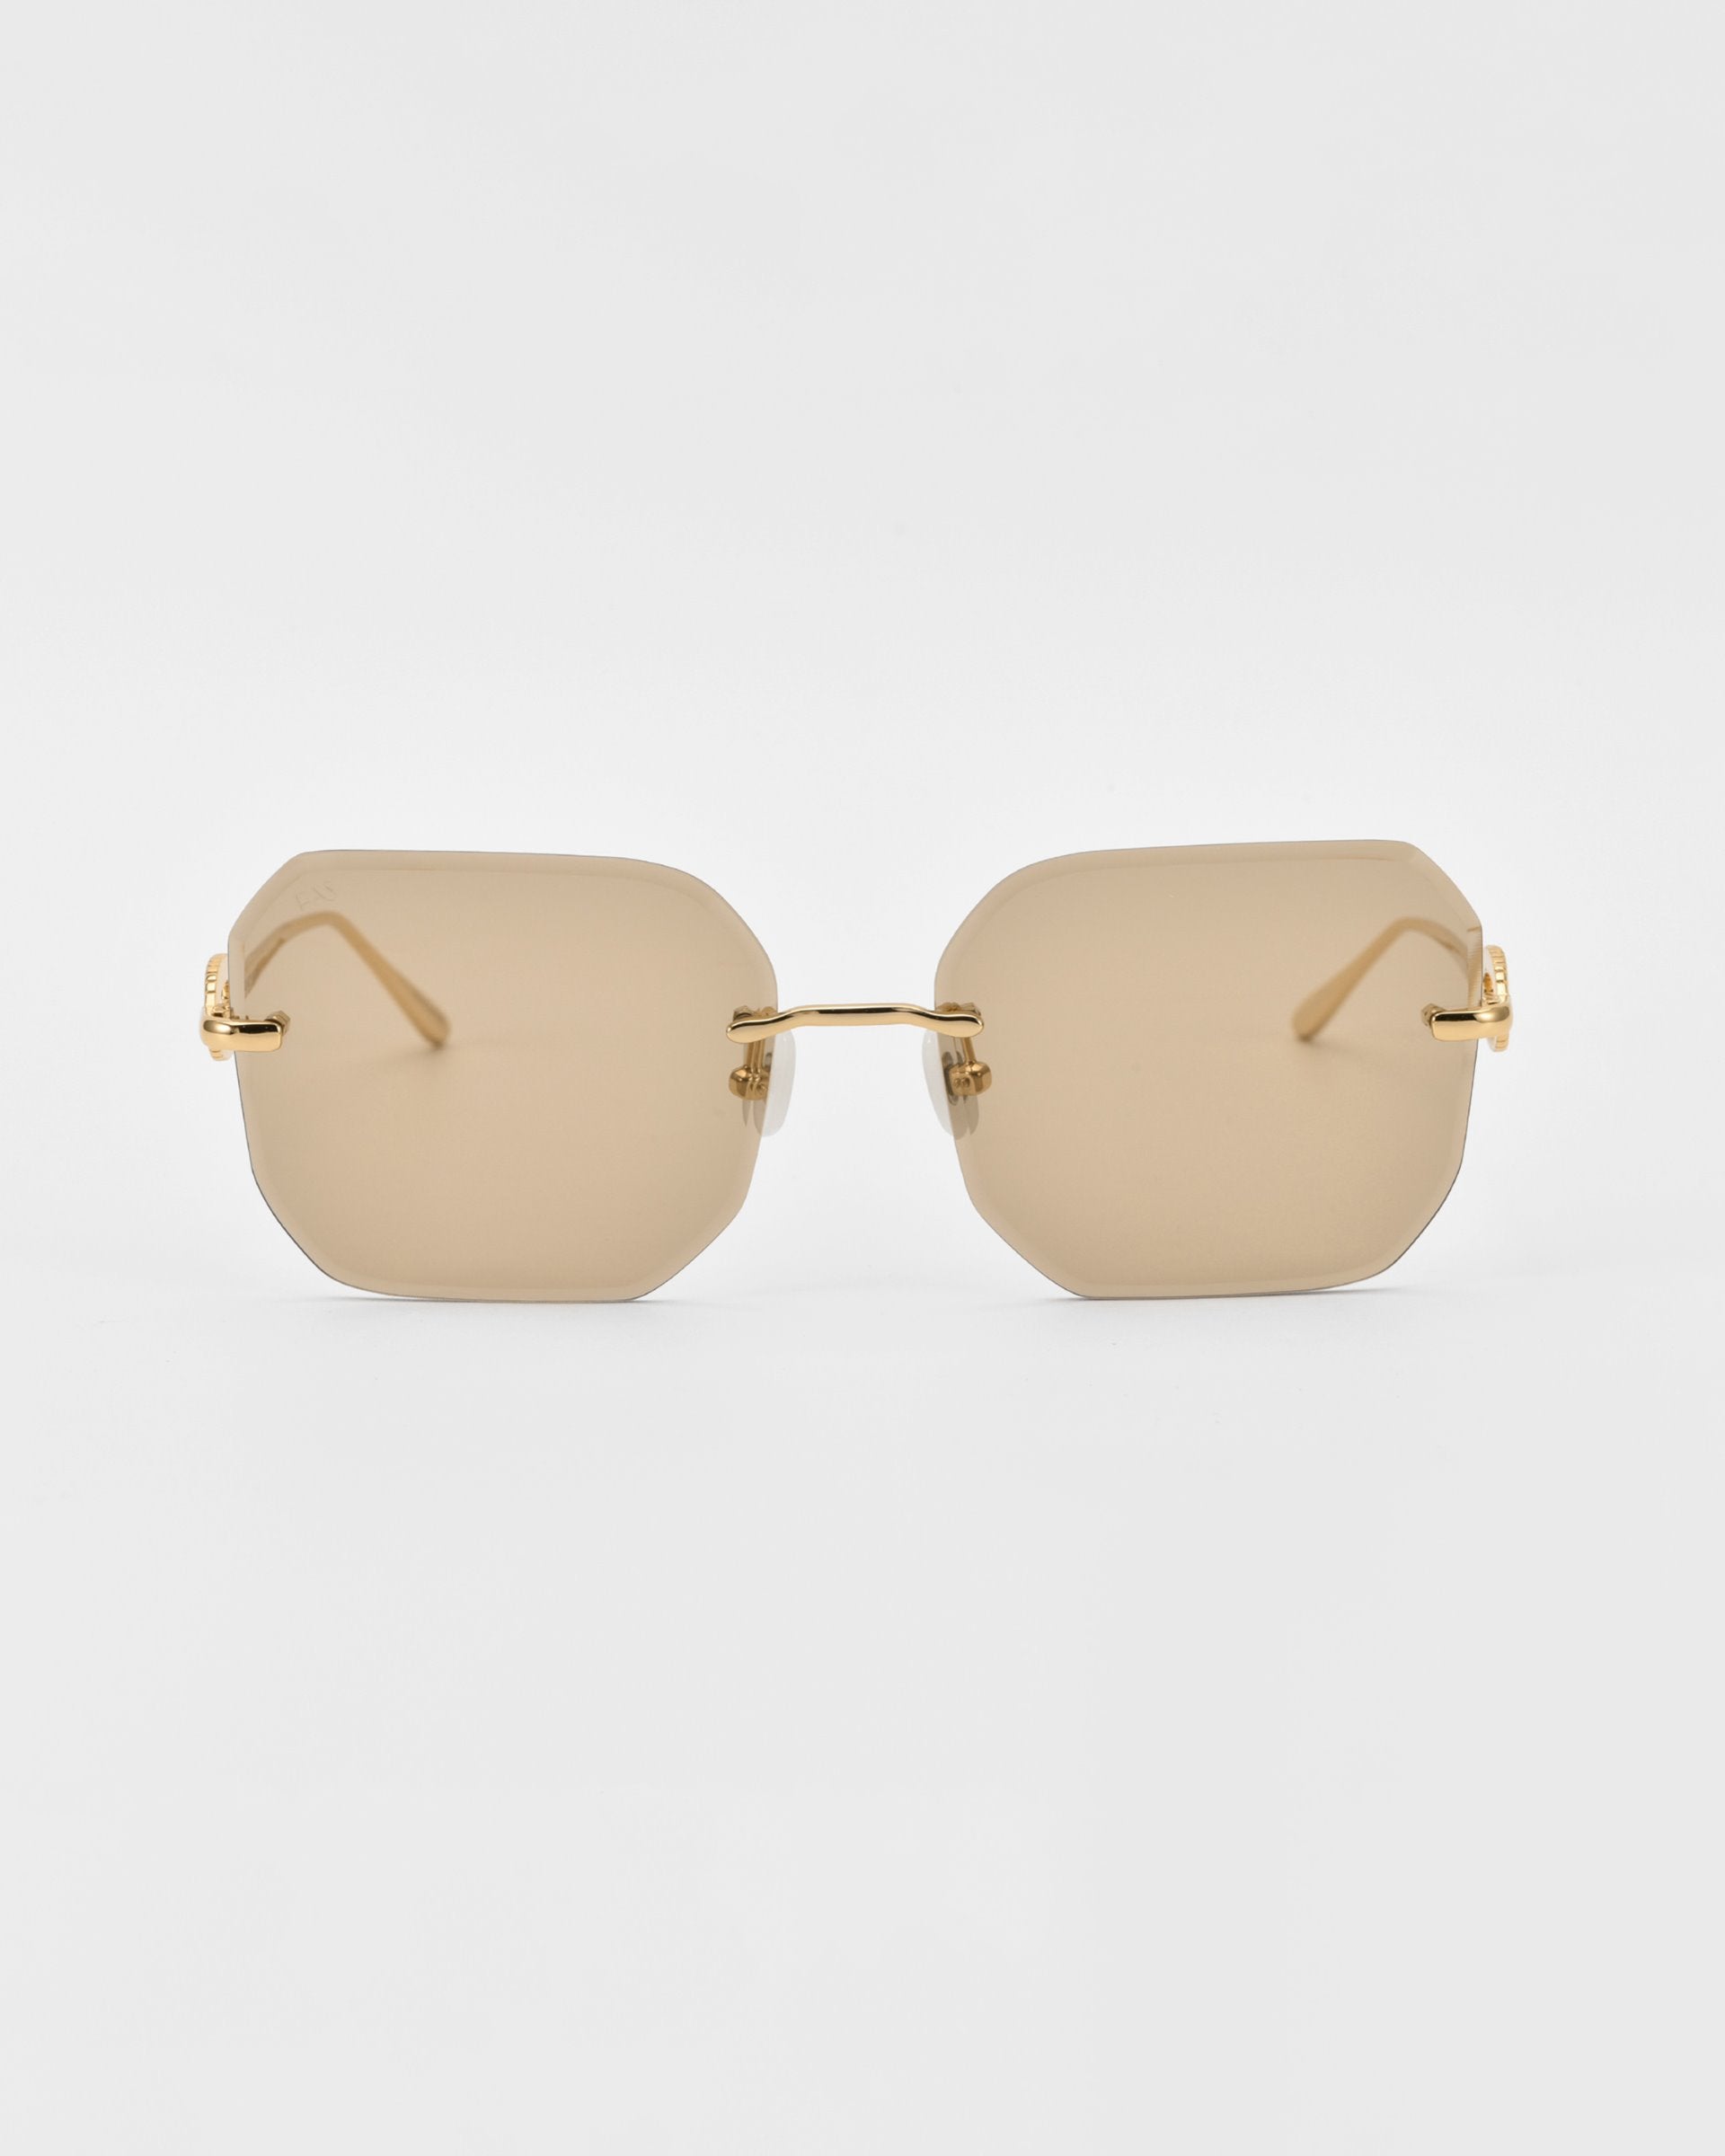 A pair of stylish For Art&#39;s Sake® Aria sunglasses featuring frameless, diamond-cut lenses with a rectangular, brown tint and gold metal arms. Jade-stone nose pads add a touch of elegance as they rest gently on the plain white background.